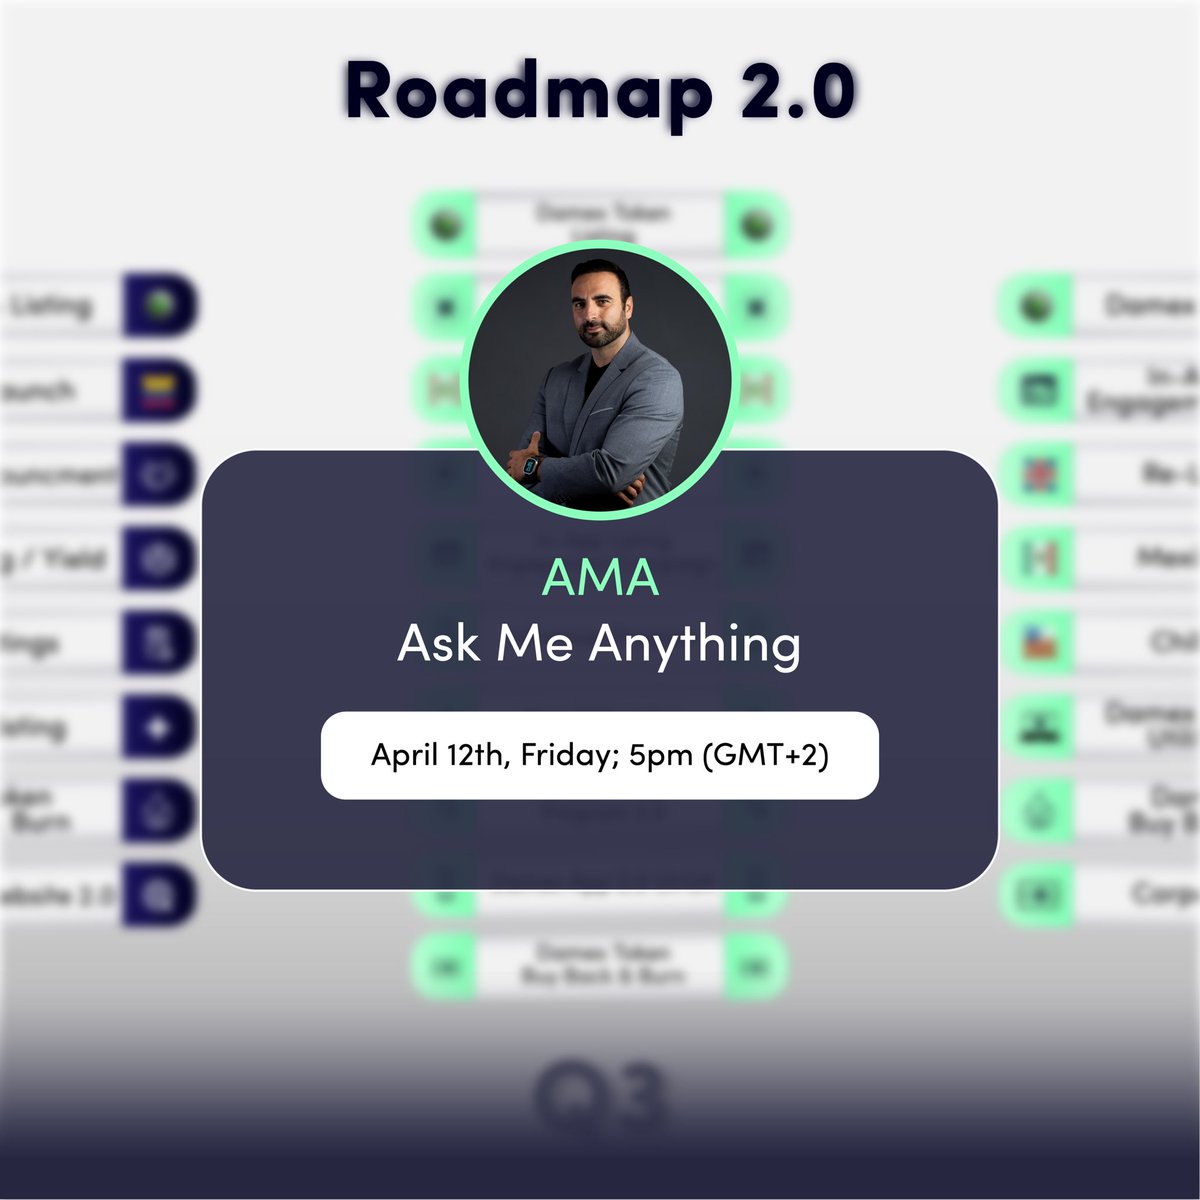 Our CEO Sam will be answering all your questions you may have about our roadmap on Twitter Space (twitter.com/i/spaces/1MYxN…)

To 'warm up,' we're going to host a giveaway of 3 prizes of $50 among the Damexians who follow the steps below:
1️⃣ RT this post
2️⃣ Tag 2 friends
3️⃣ Follow…